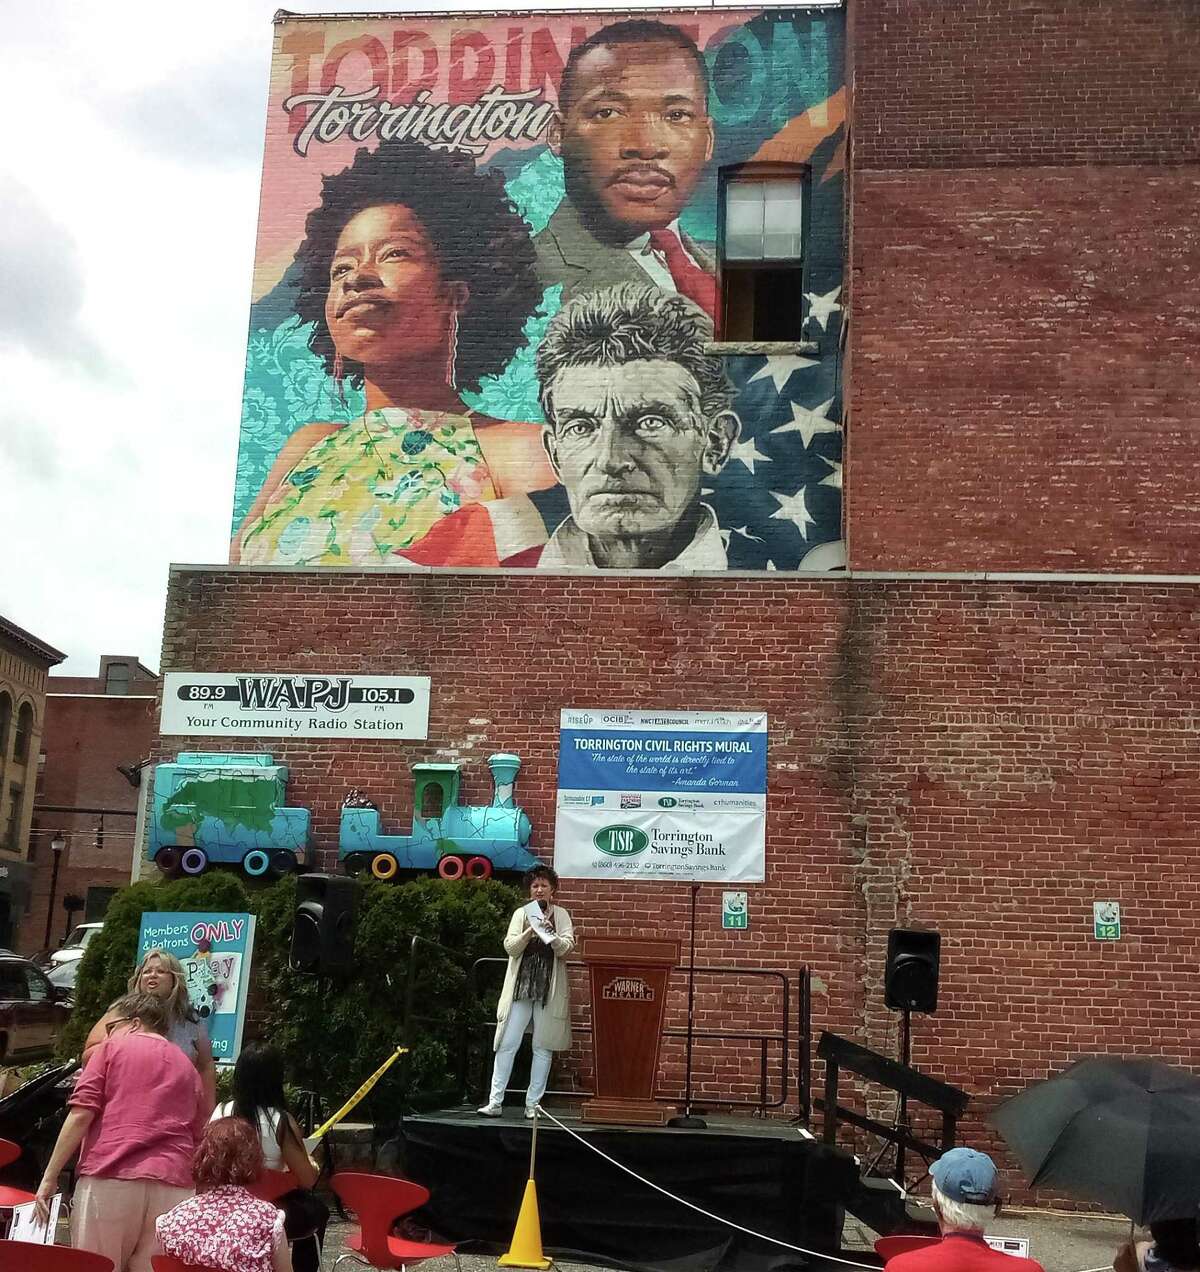 The unveiling of the MLK mural on the wall of the WAPJ building in Torrington.